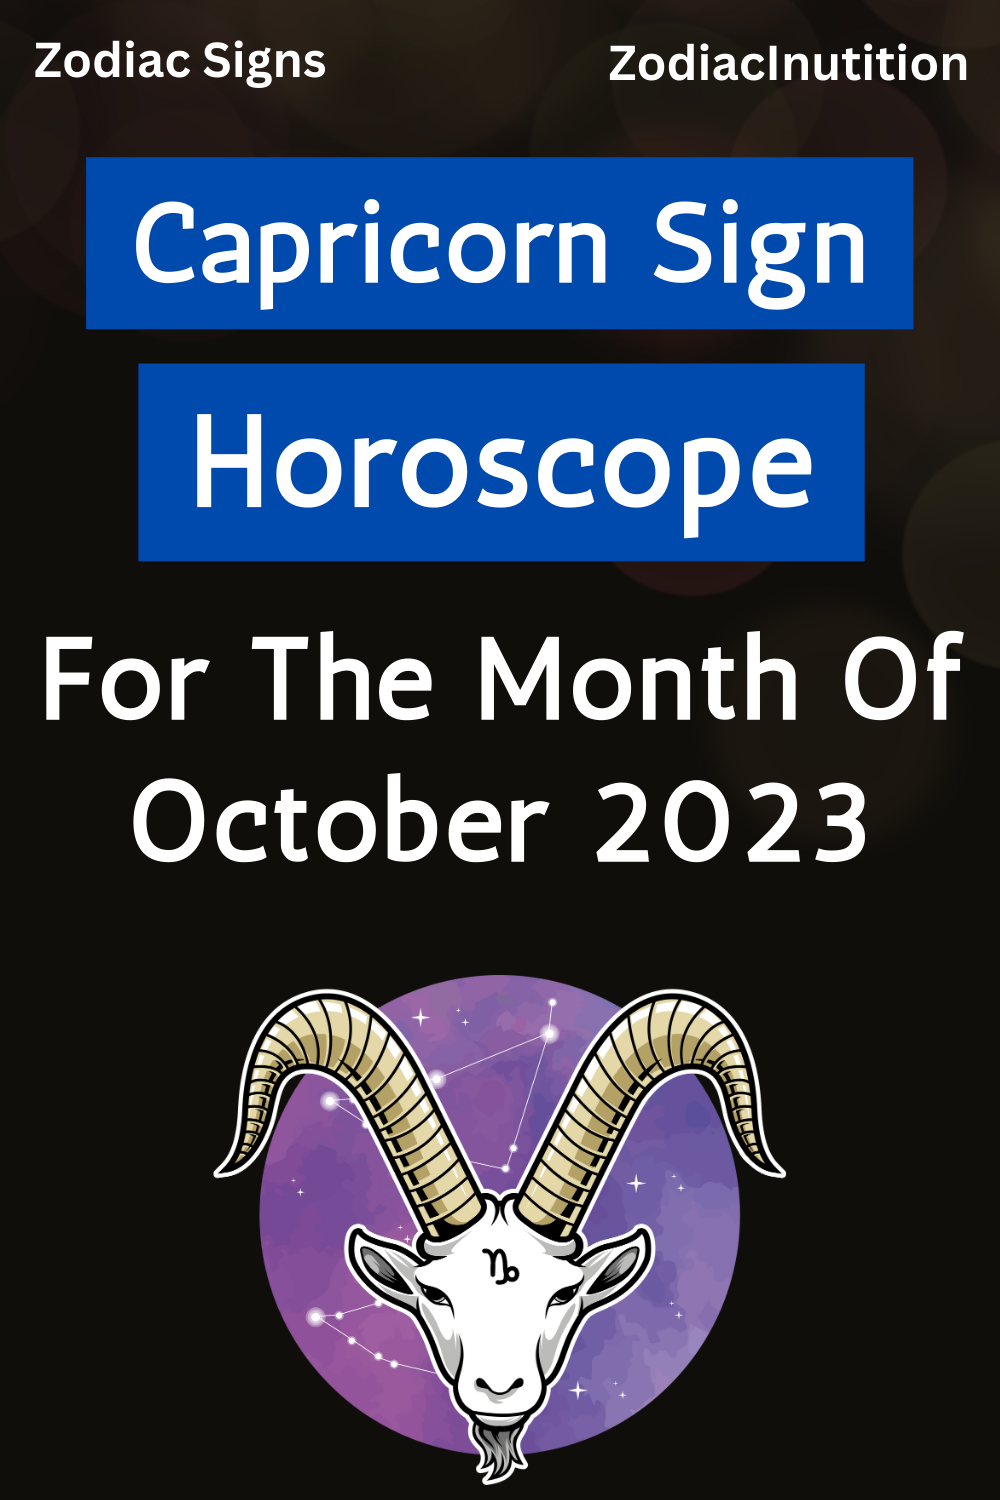 Capricorn: Horoscope For The Month Of October 2023